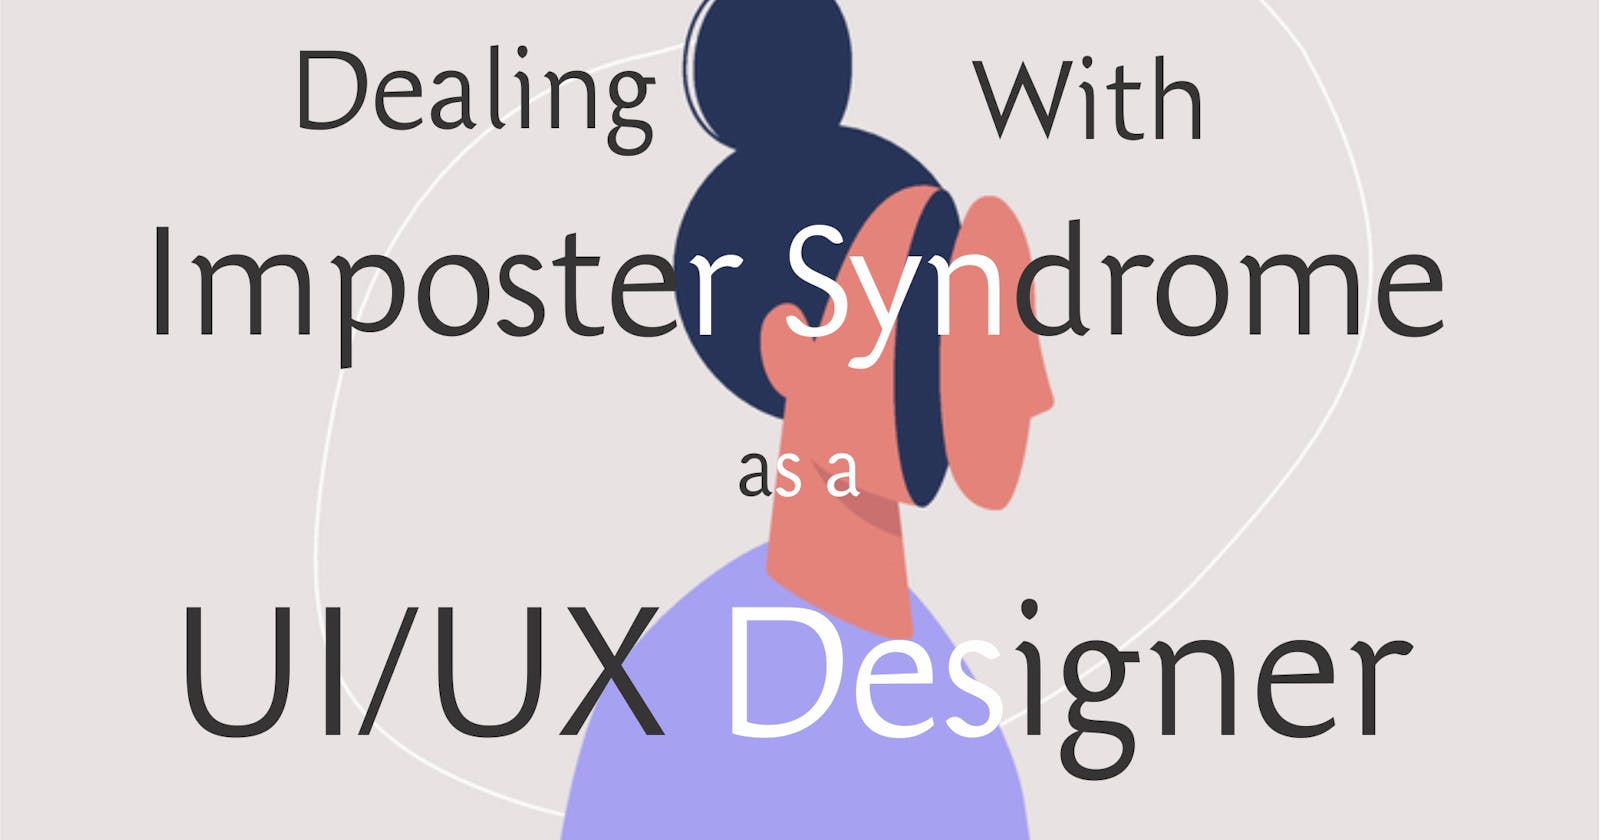 Dealing with Imposter Syndrome as a UI/UX Designer